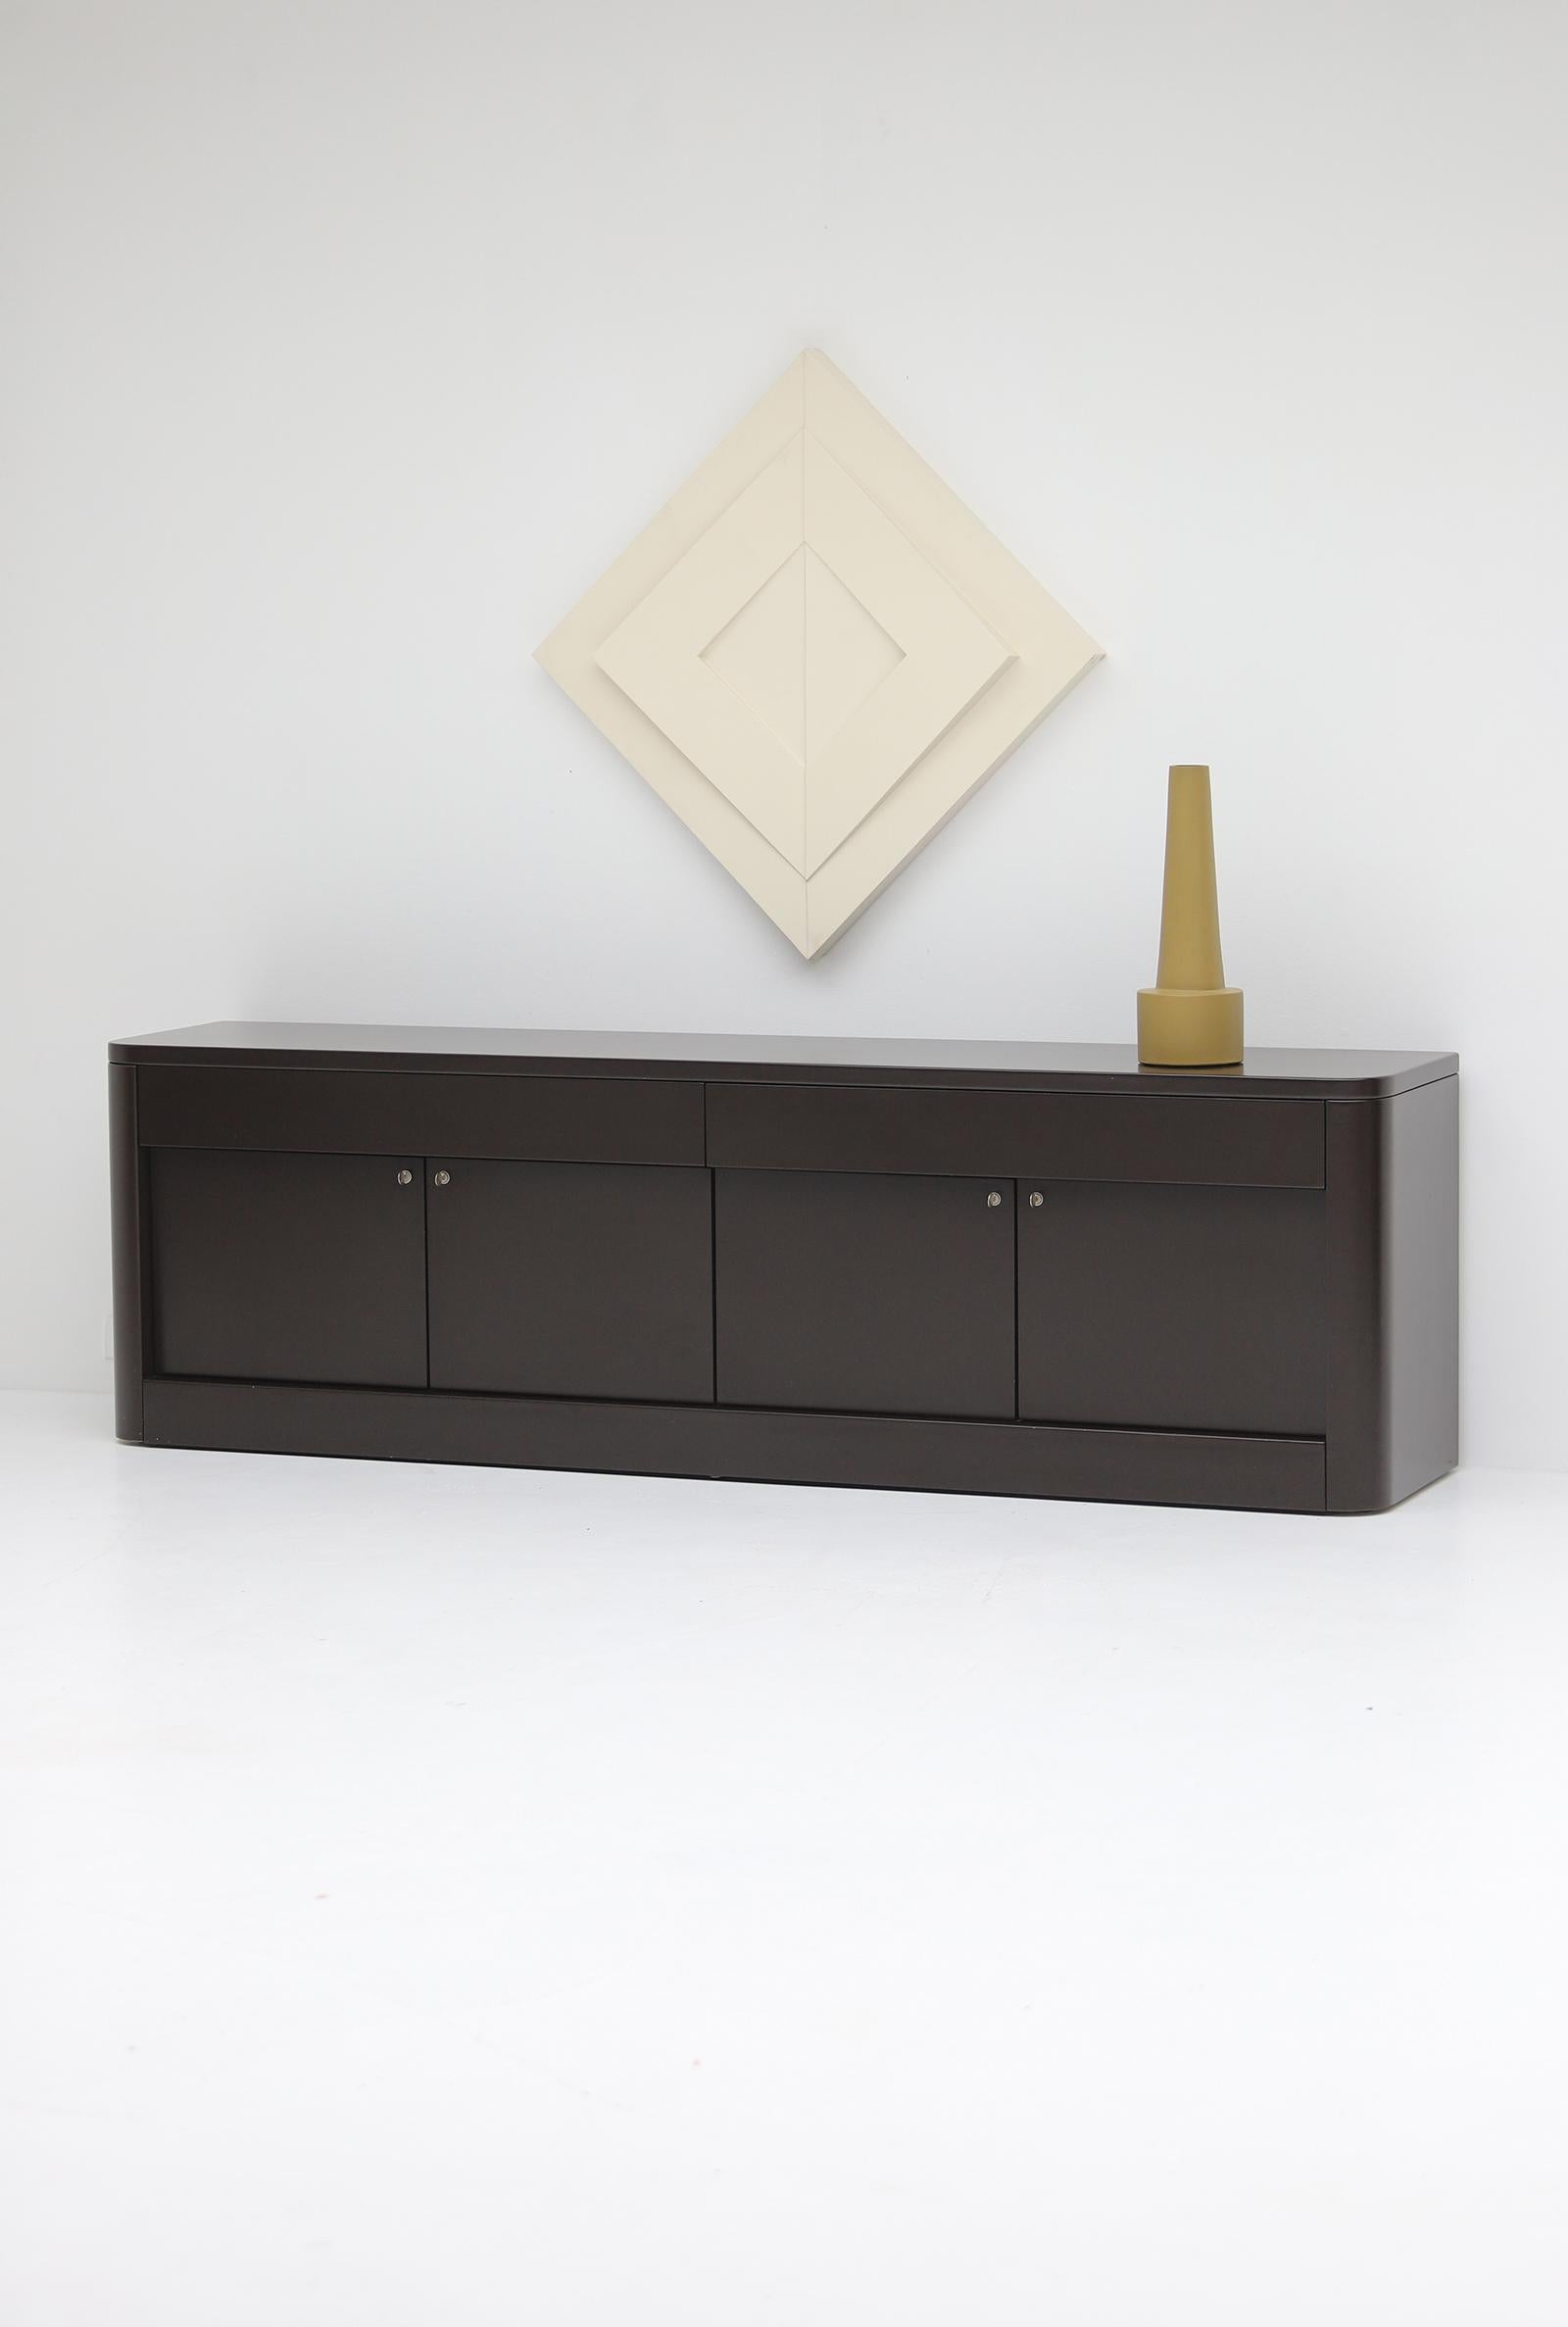 When design becomes science fiction. This dark brown sideboard was designed by Ghent based designer Frank De Clercq in 1967. Its minimalist shape and style reminds me the science fiction movie settings of the late 60s and 70s. Directors such as